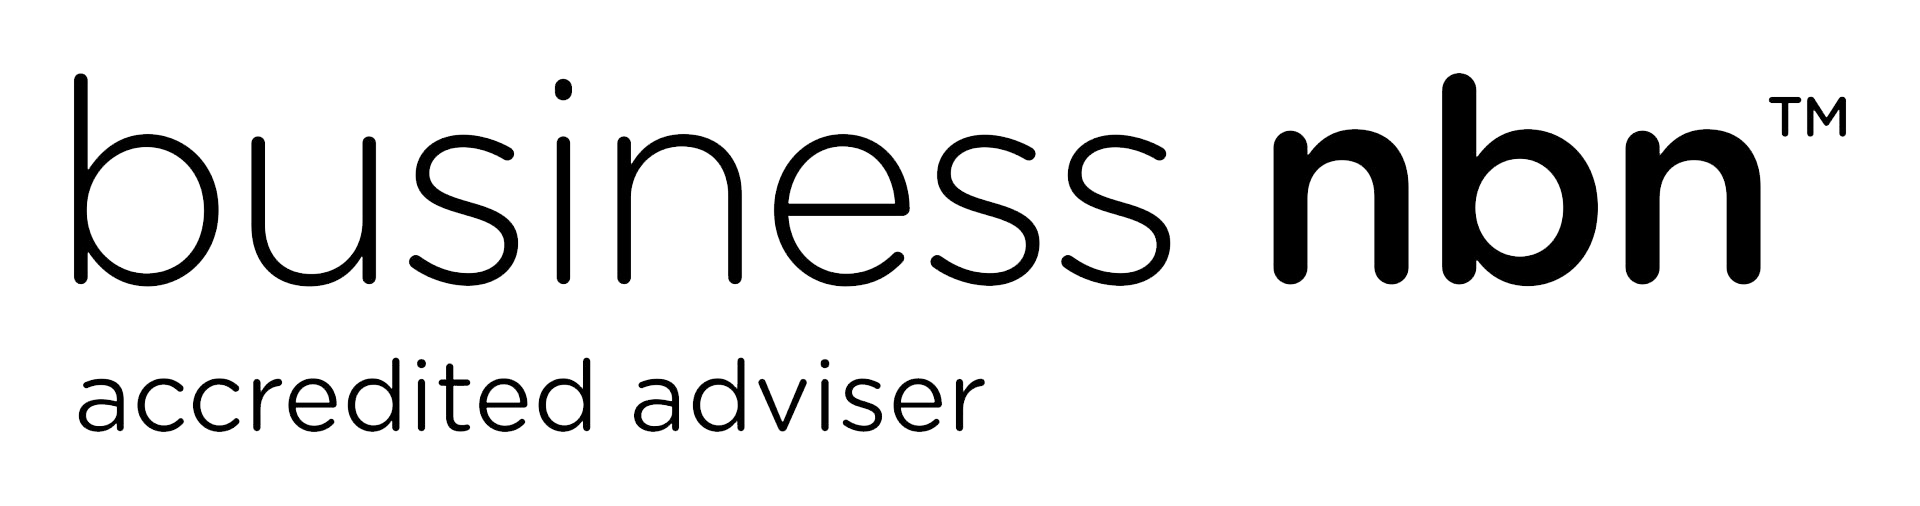 Business nbn Accredited Adviser